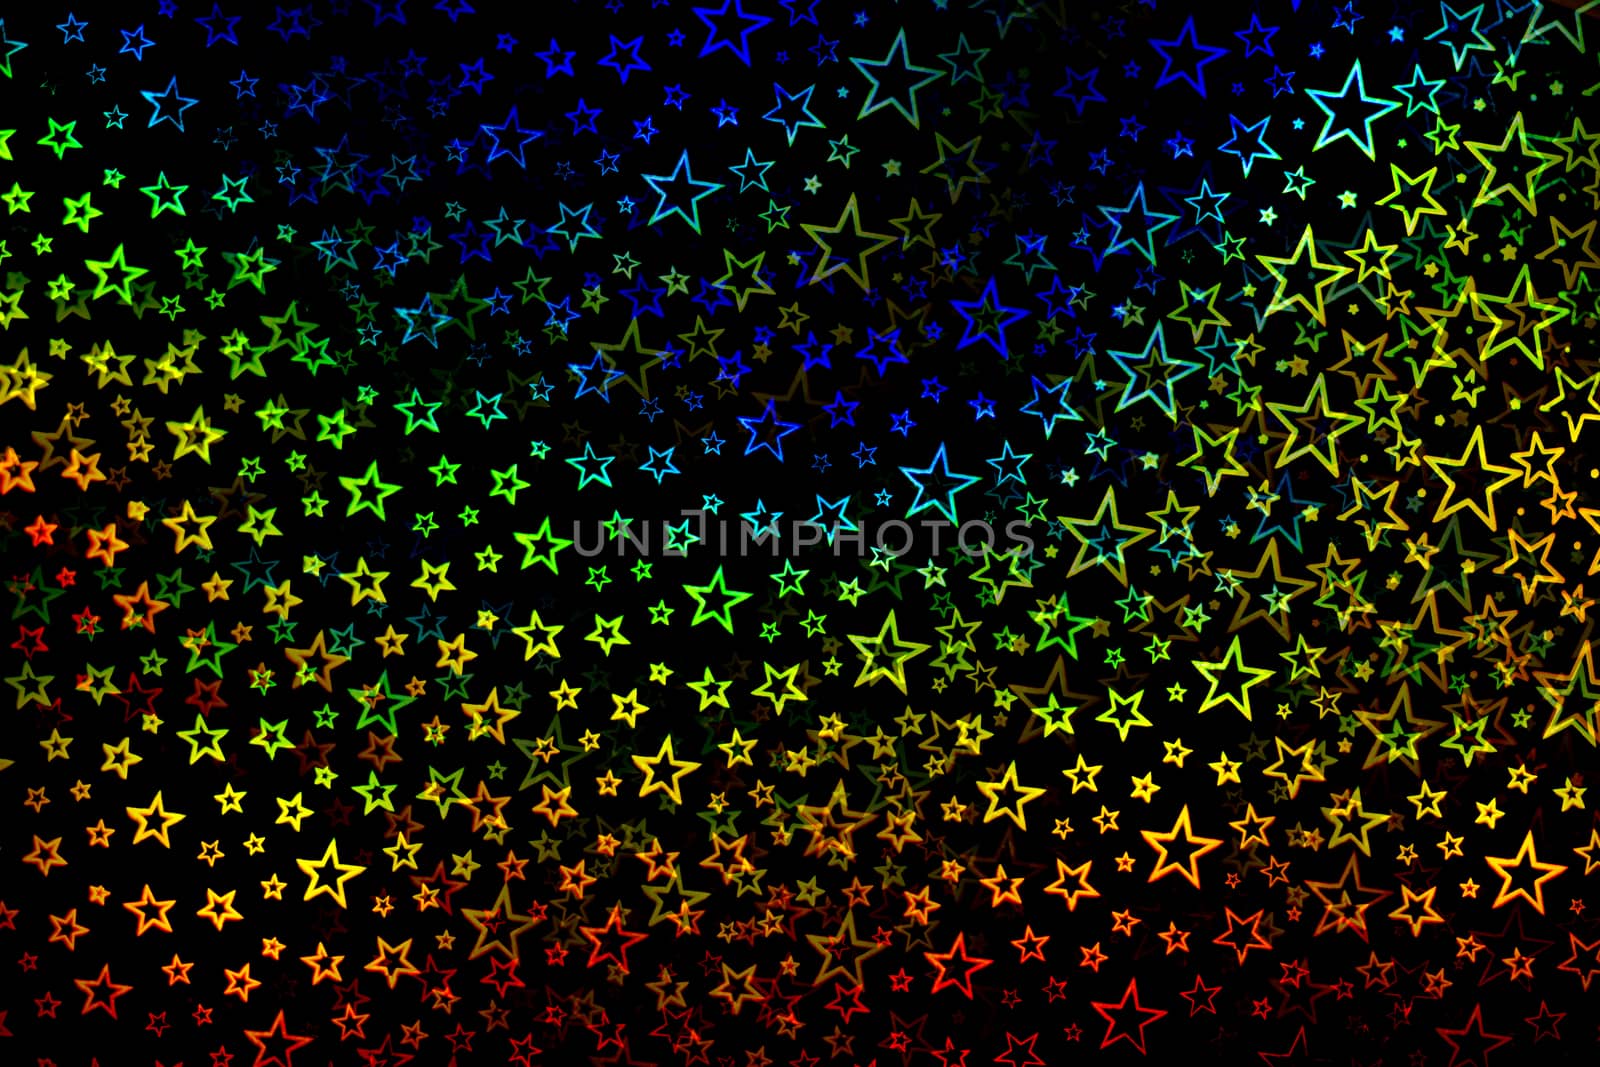 Background with bright multicolored stars by GemaIbarra